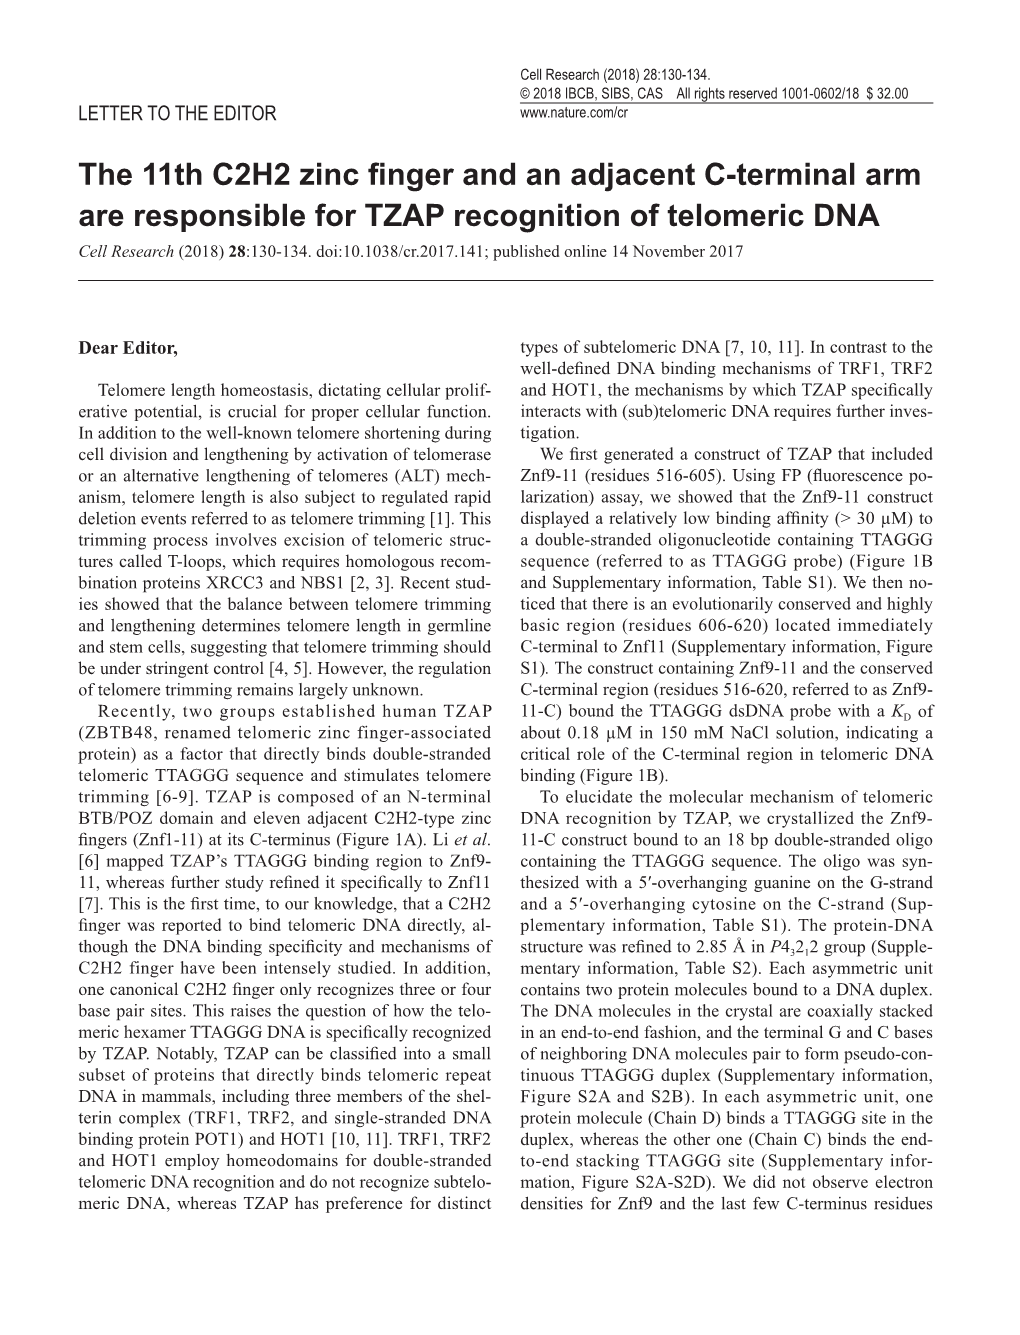 The 11Th C2H2 Zinc Finger and an Adjacent C-Terminal Arm Are Responsible for TZAP Recognition of Telomeric DNA Cell Research (2018) 28:130-134